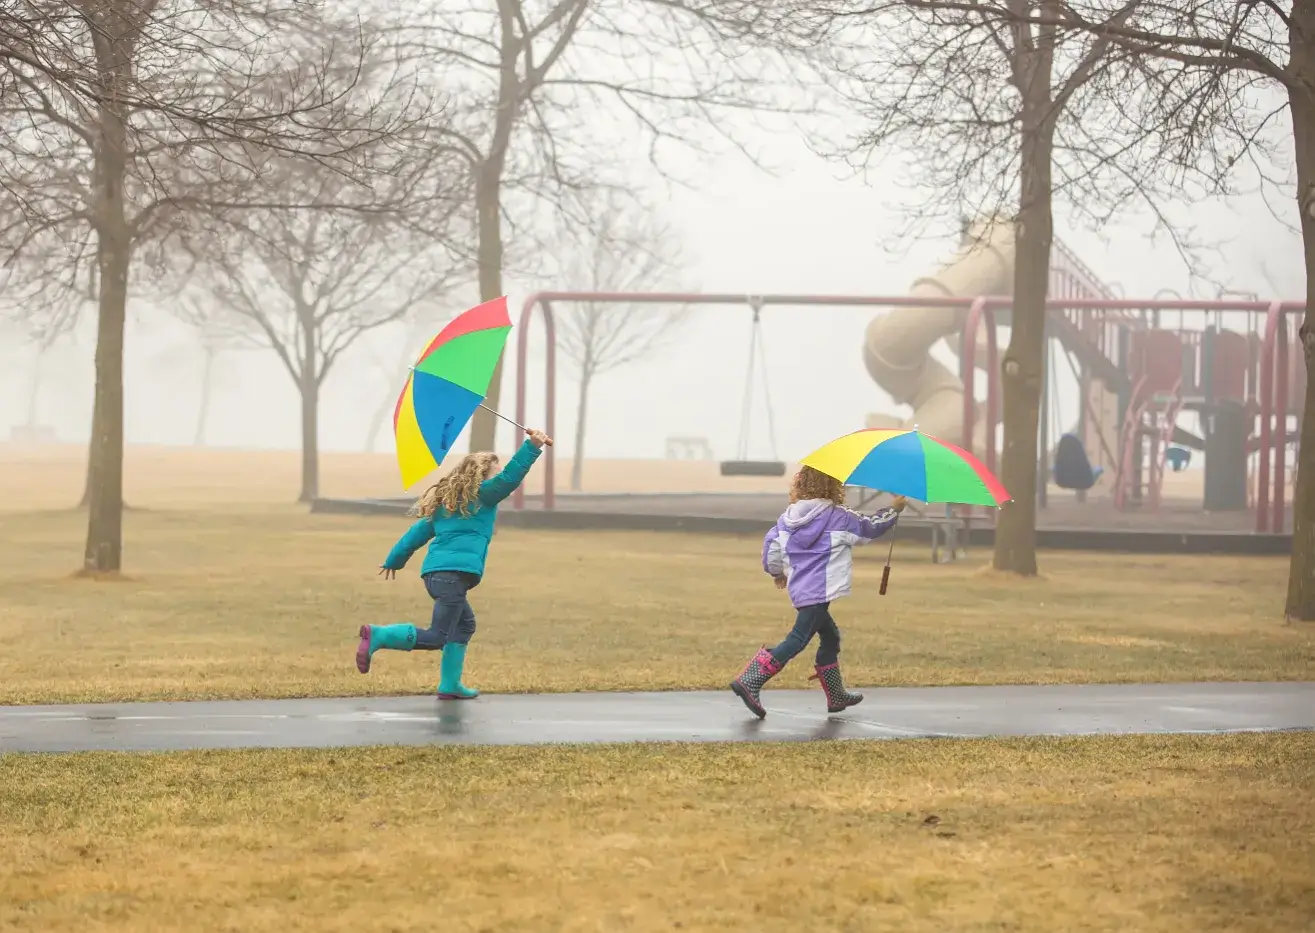 Two young girls at a park running in the rain with umbrellas and rain boots on a foggy day.